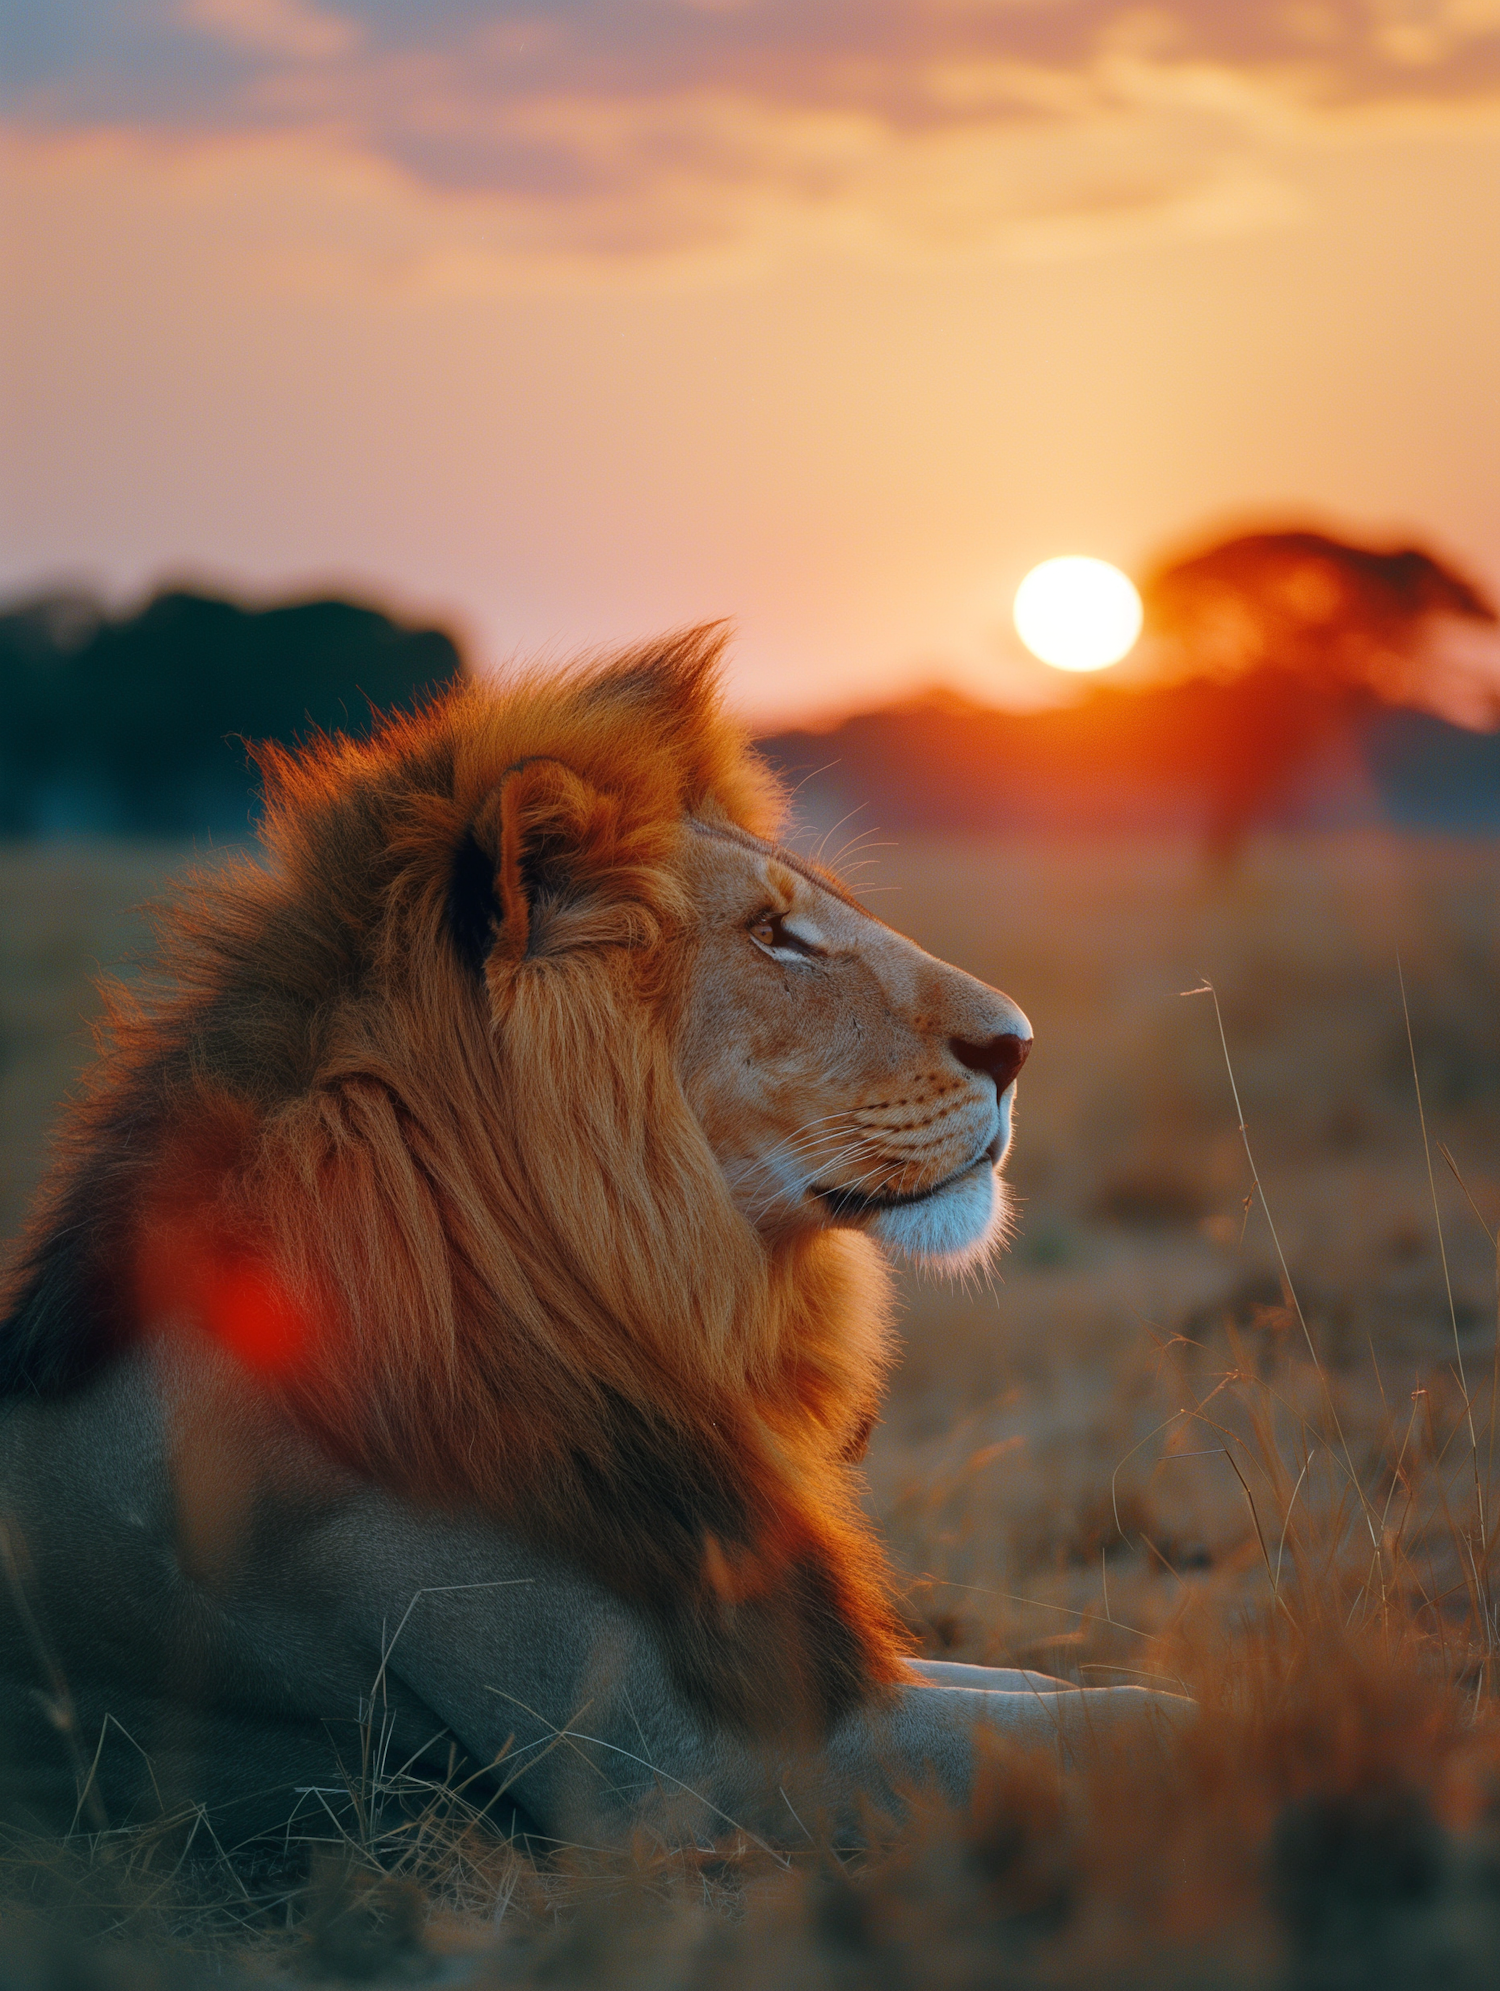 Majestic Lion in Sunset